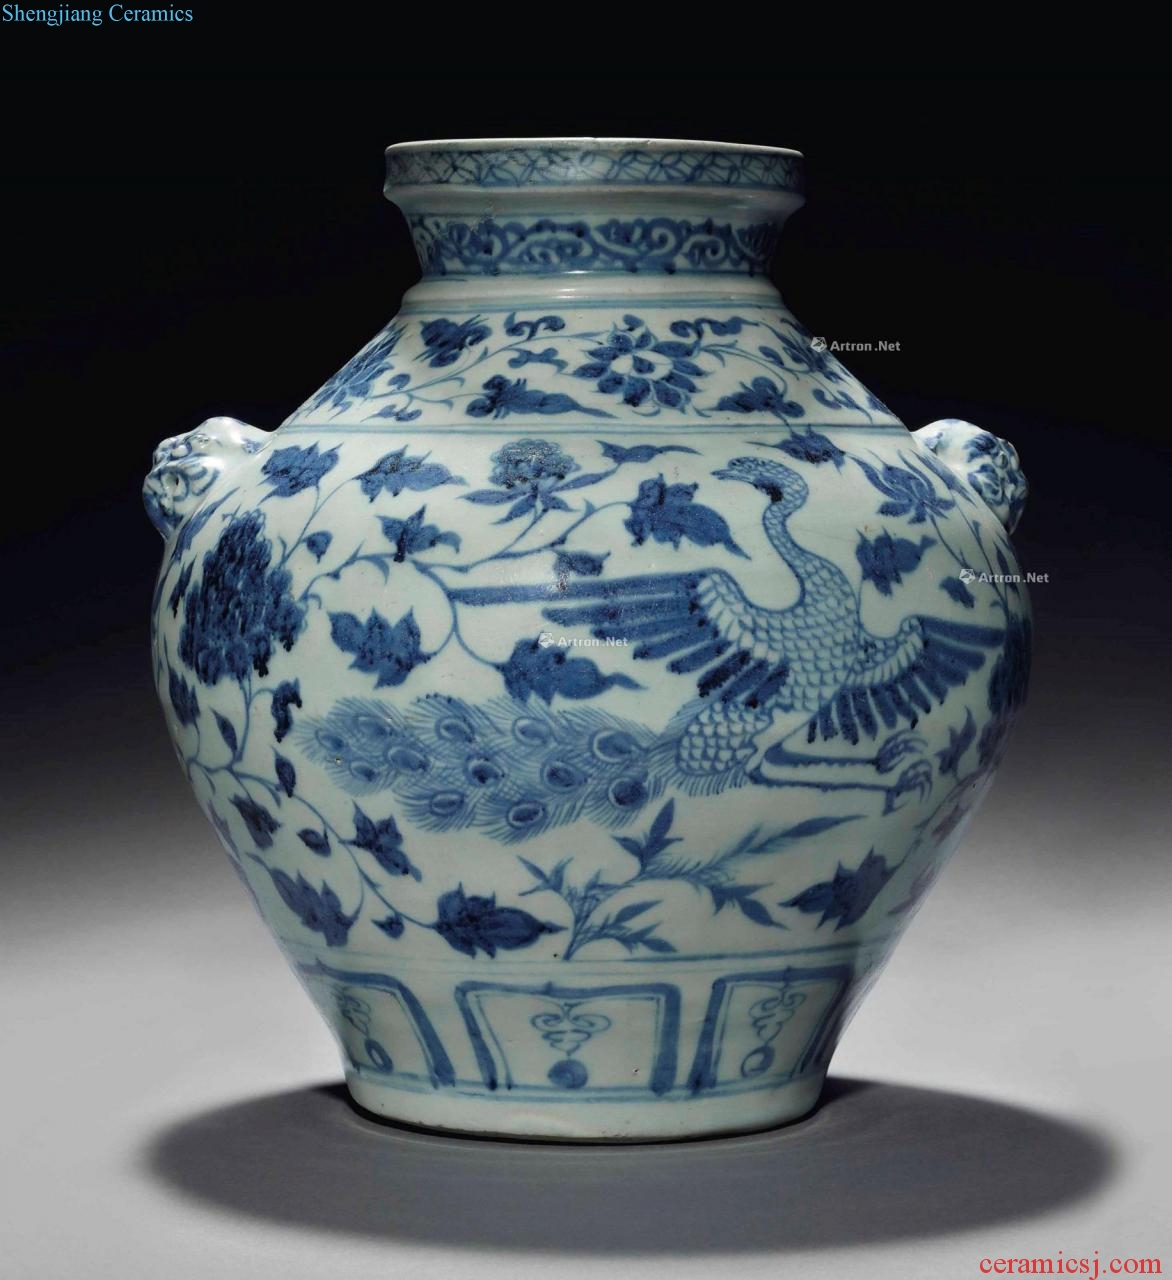 The yuan dynasty (1279-1368), A VERY RARE BLUE AND WHITE "PEACOCK" JAR, GUAN